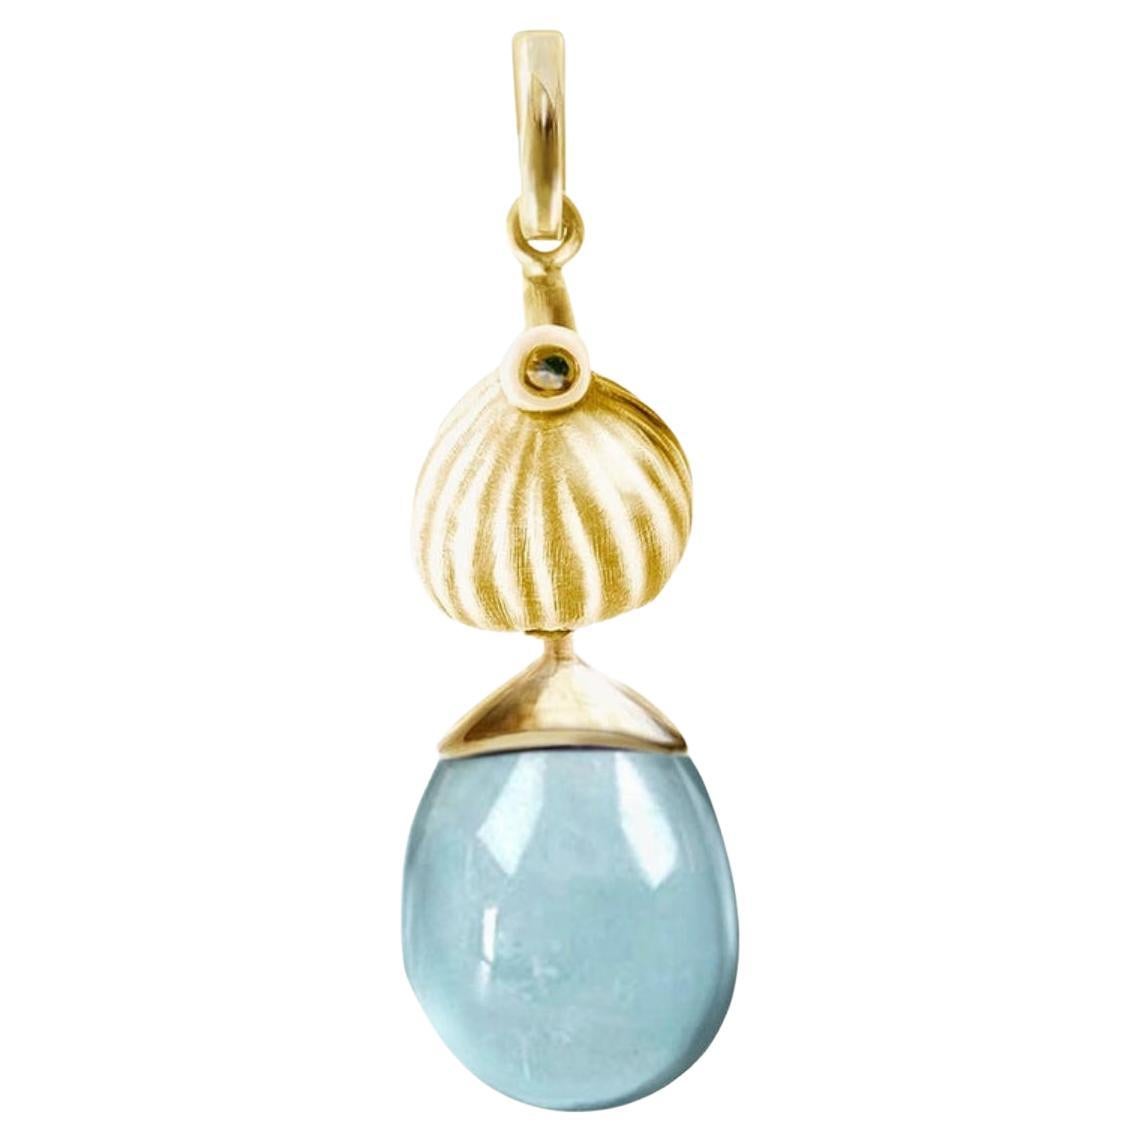 Yellow Gold Drop Pendant Necklace with Blue Topaz by the Artist For Sale